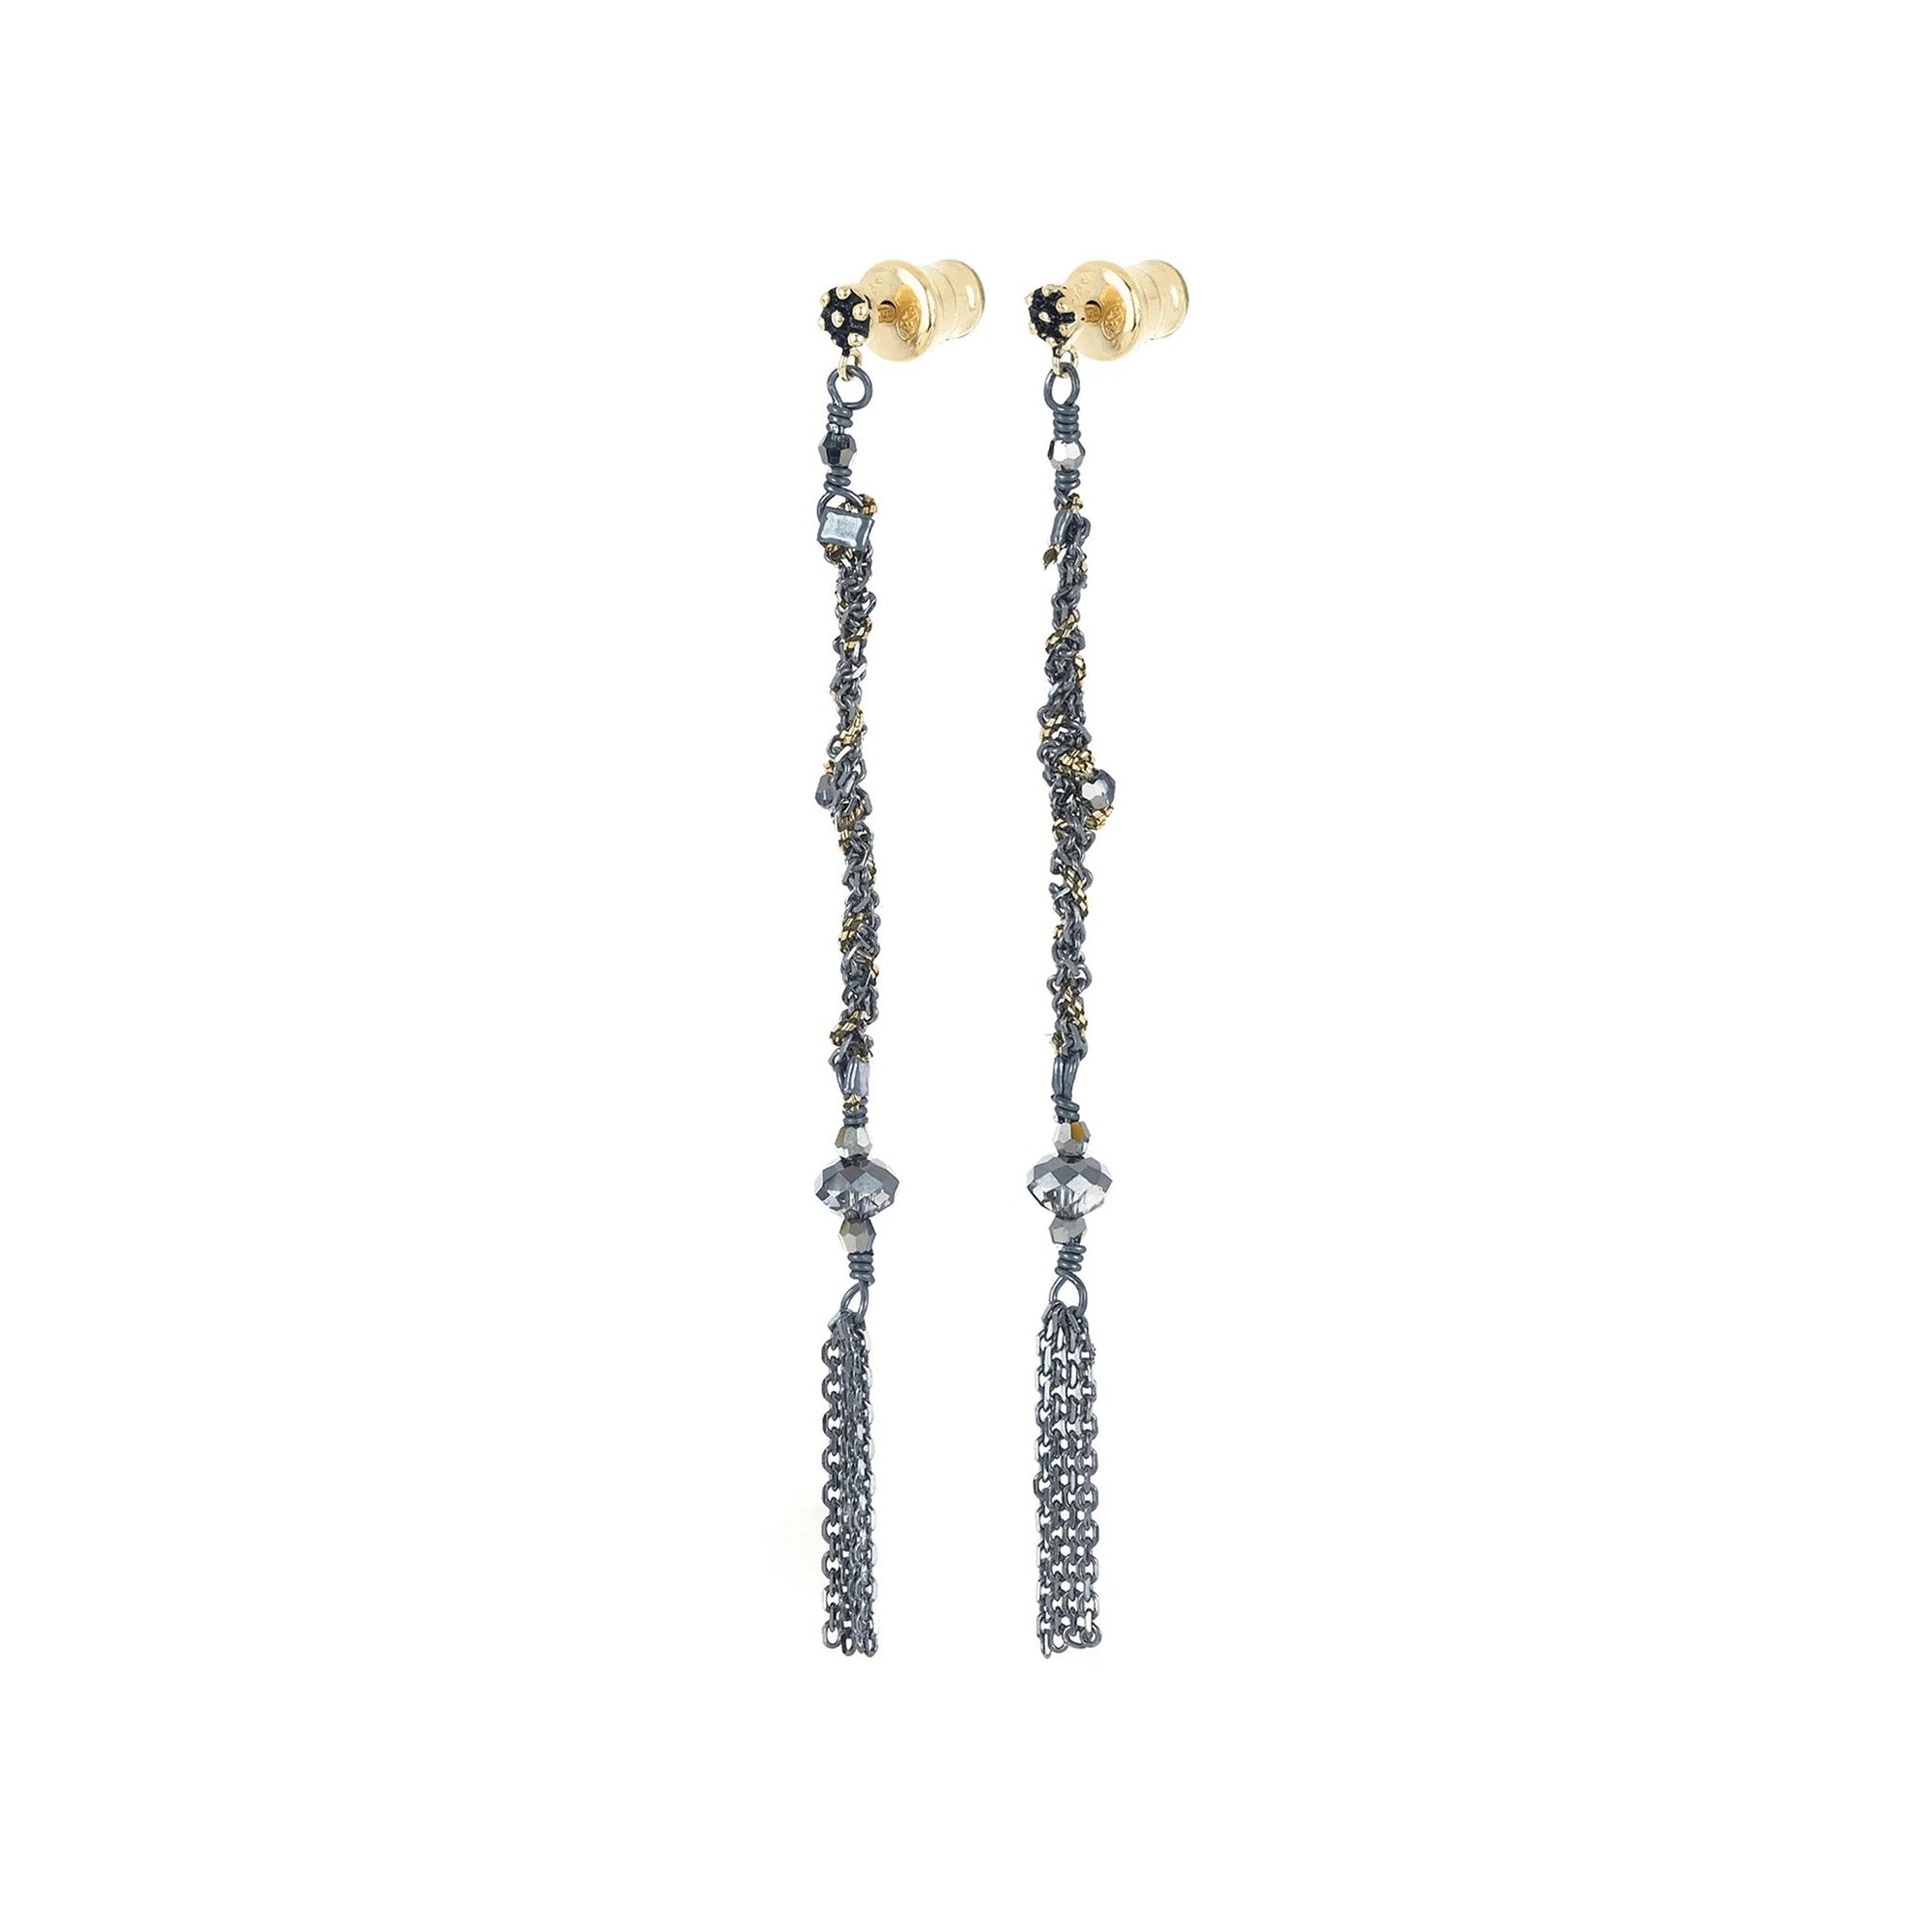 Ruthenium Woven Chain Drop Earrings with Crystal Beads - Peridot Fine Jewelry - Marie Laure Chamorel